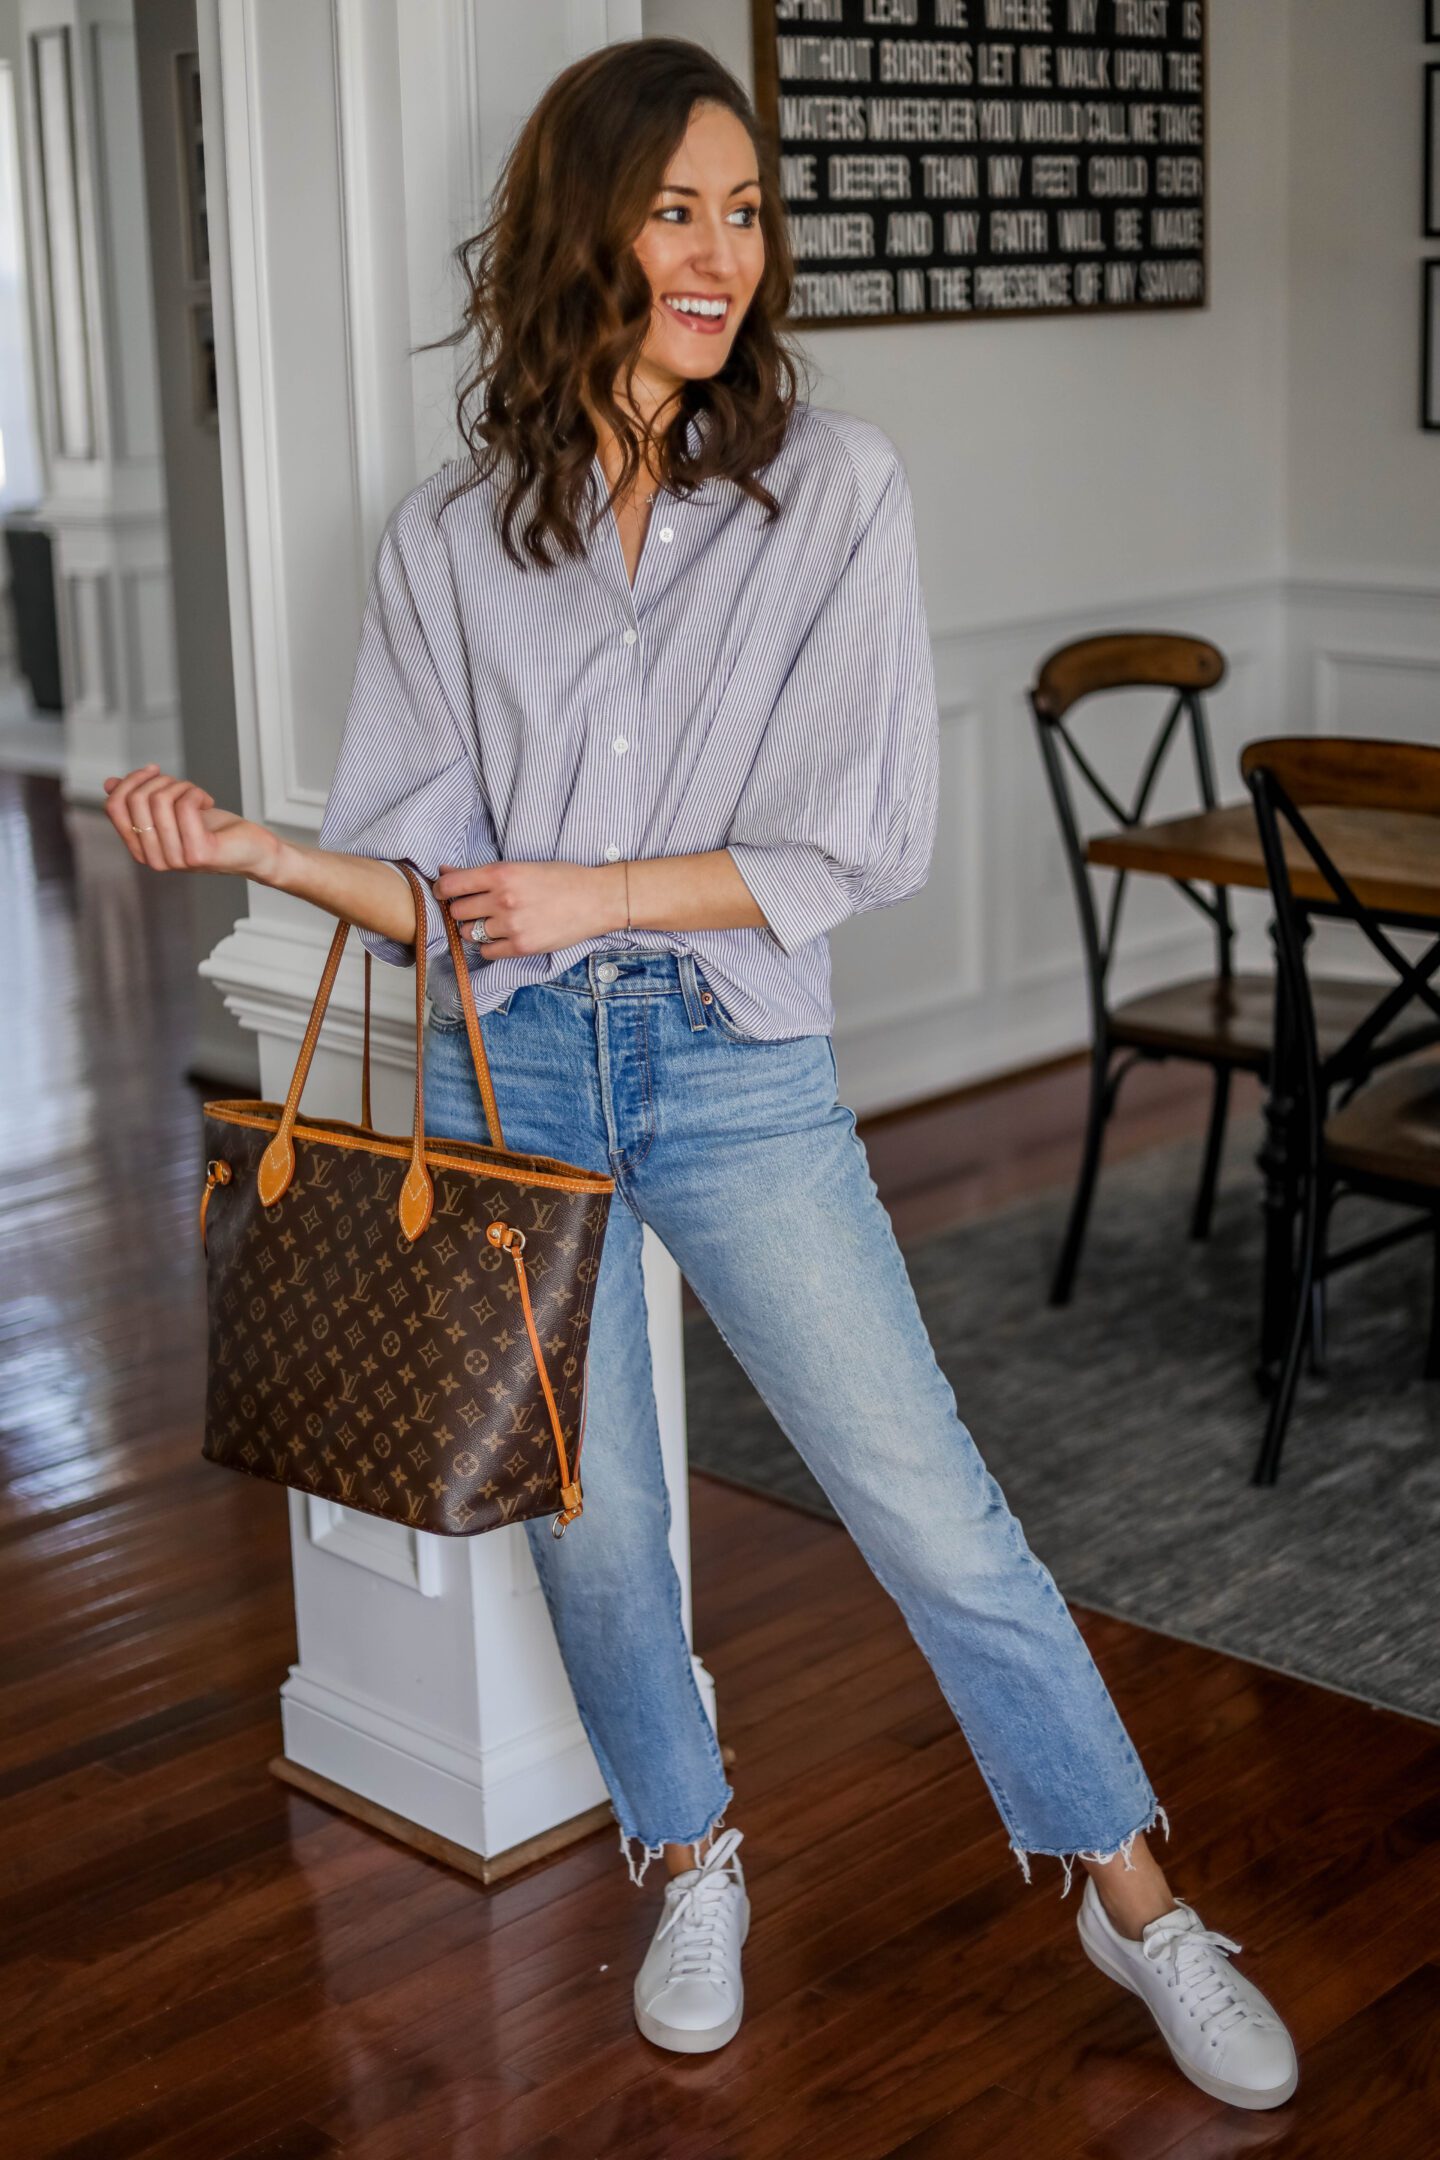 BEST LOUIS VUITTON BAGS FOR MOMS - My 3 personal favorites - LOUIS VUITTON NEVERFULL MM